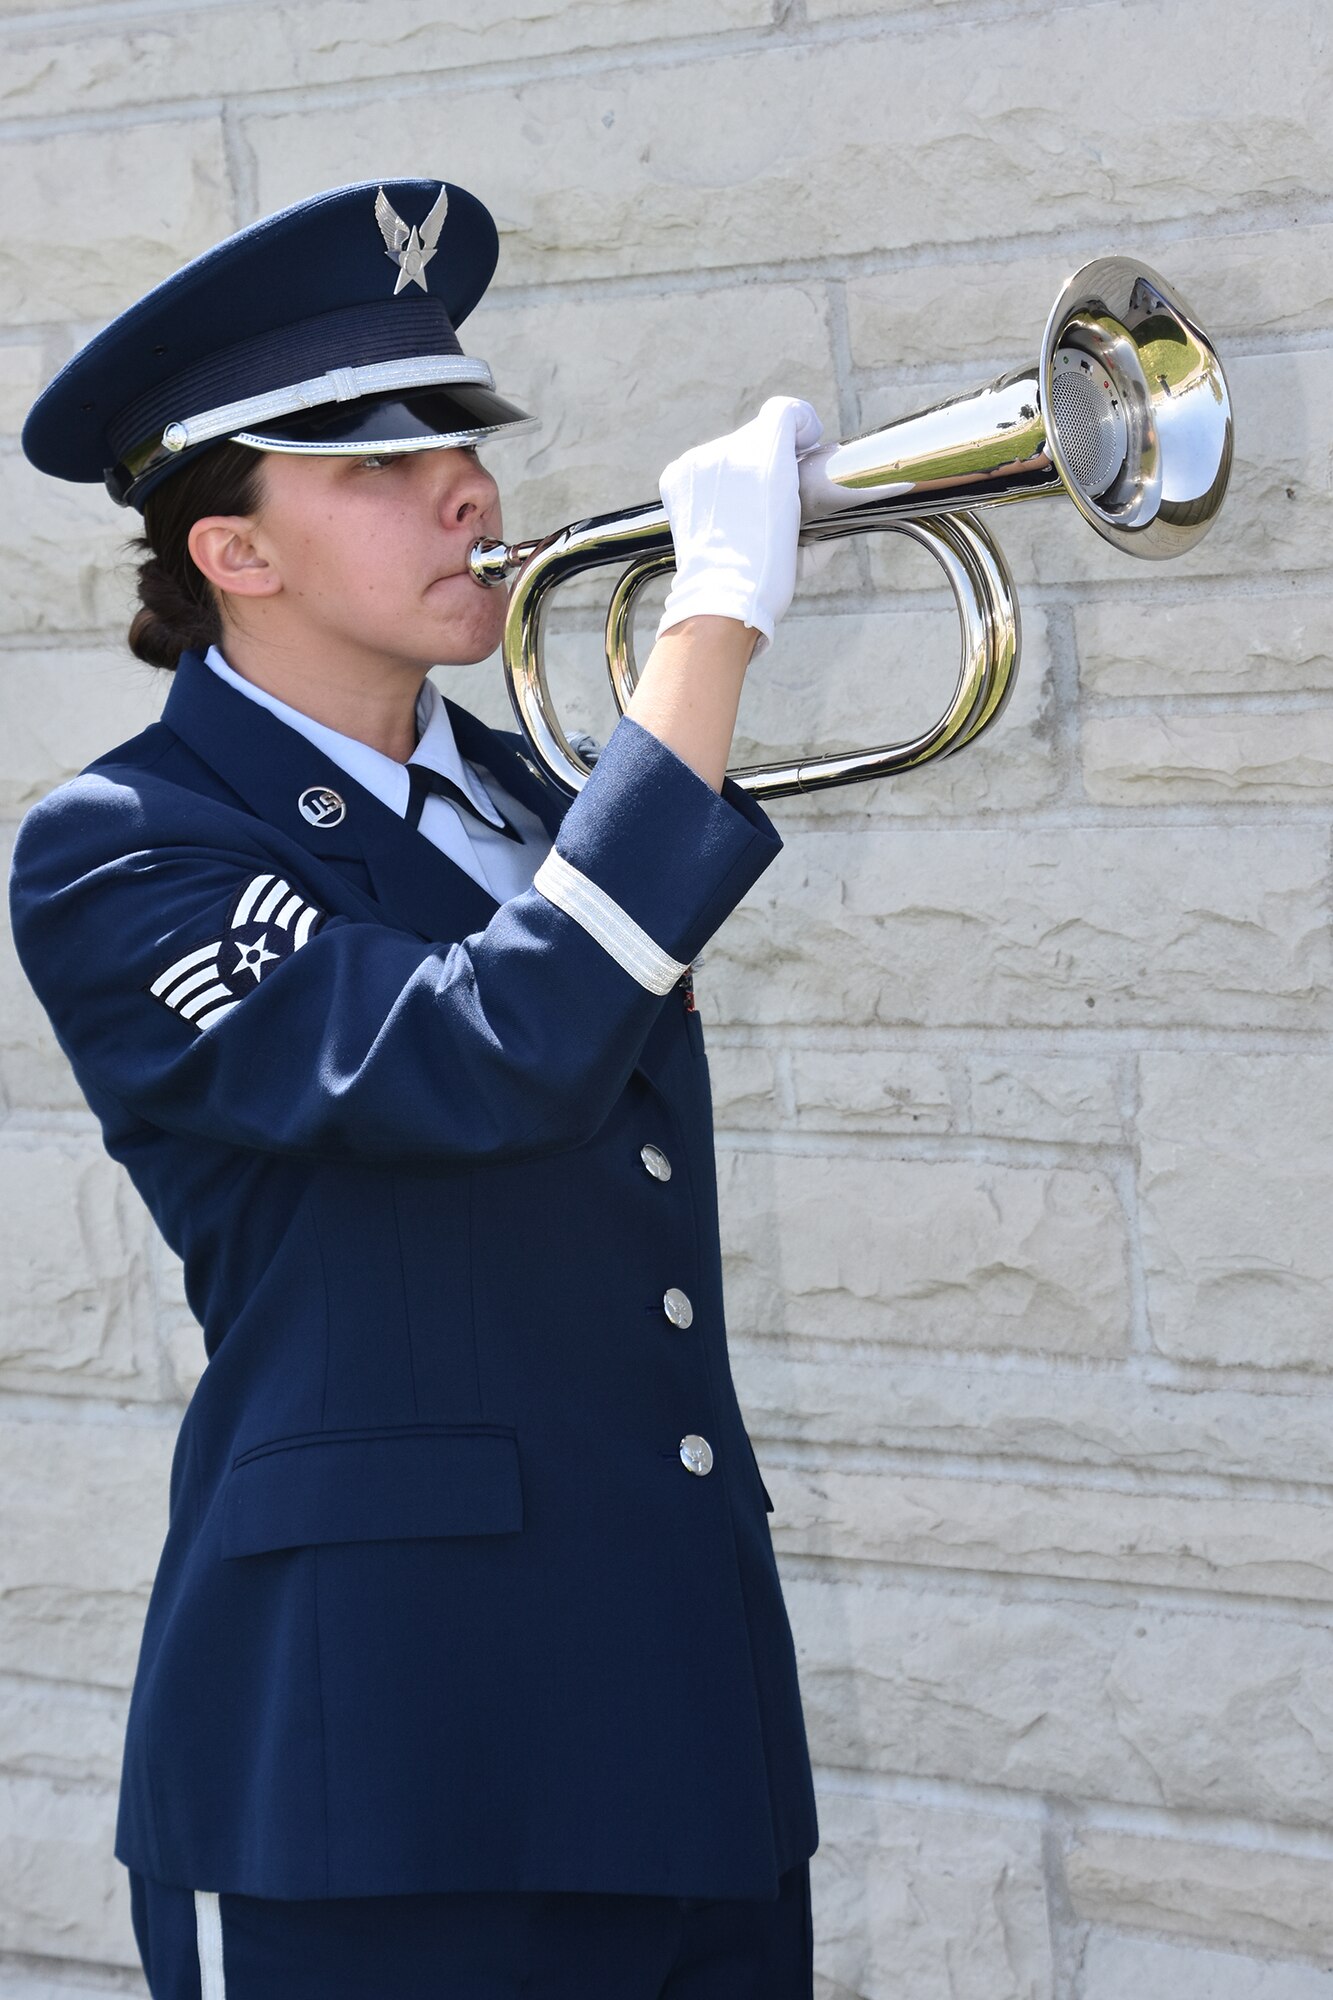 Staff Sgt. Jacquelyn Eye, a member of the Missouri Air National Guard Funeral Honors team, performs Taps for a ceremony at Jefferson Barracks National Cemetery, April 30, 2018, in honor of World War II combat aviator and former 131st Tactical Fighter Wing commander, Brig. Gen. Harding Zumwalt.  (U.S. Air National Guard photo by Senior Master Sgt. Mary-Dale Amison)